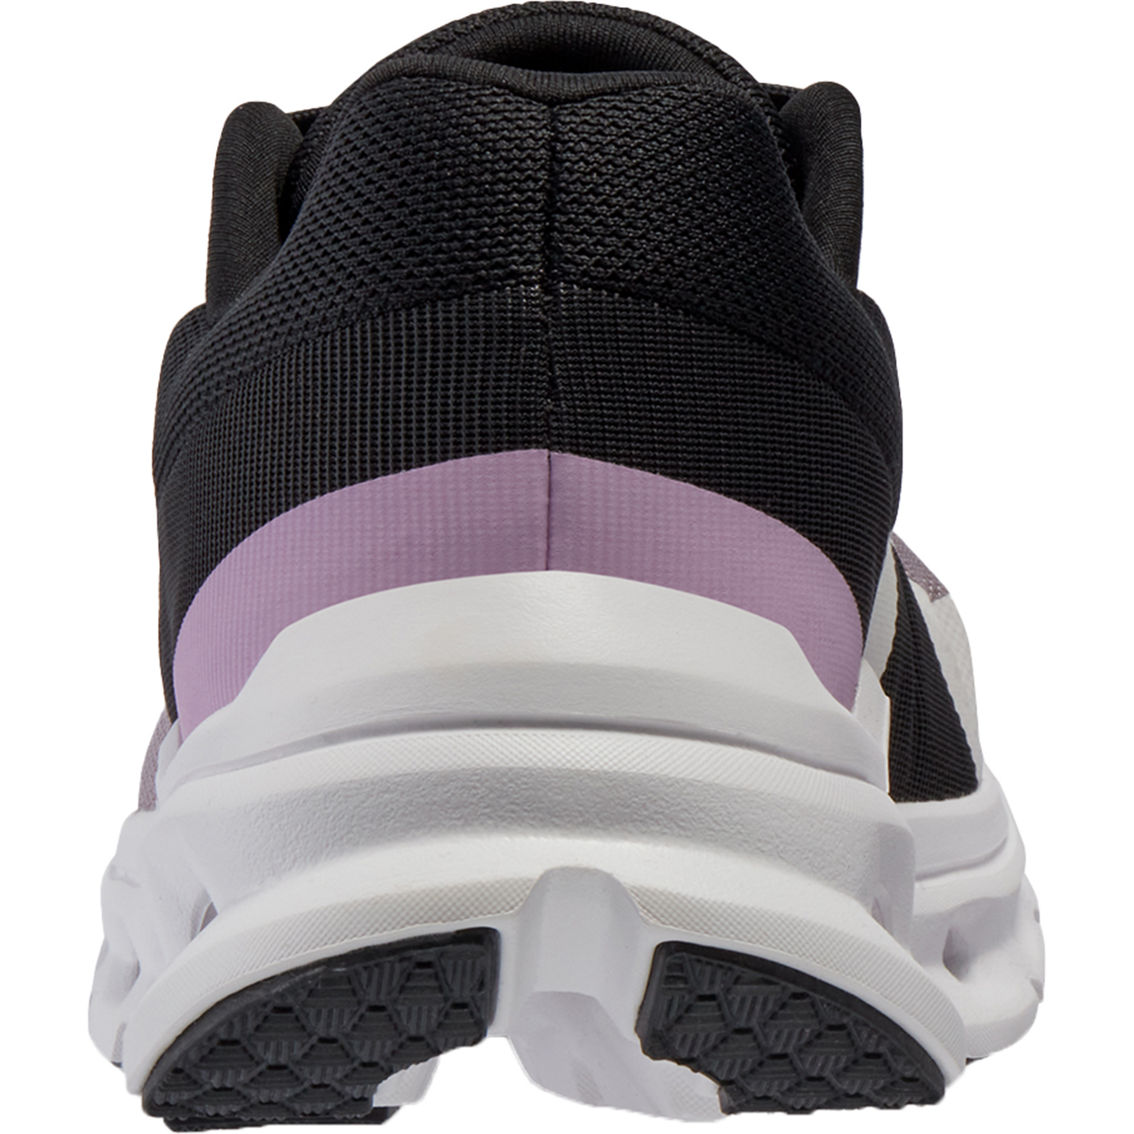 On Women's Cloudrunner Running Shoes - Image 6 of 6